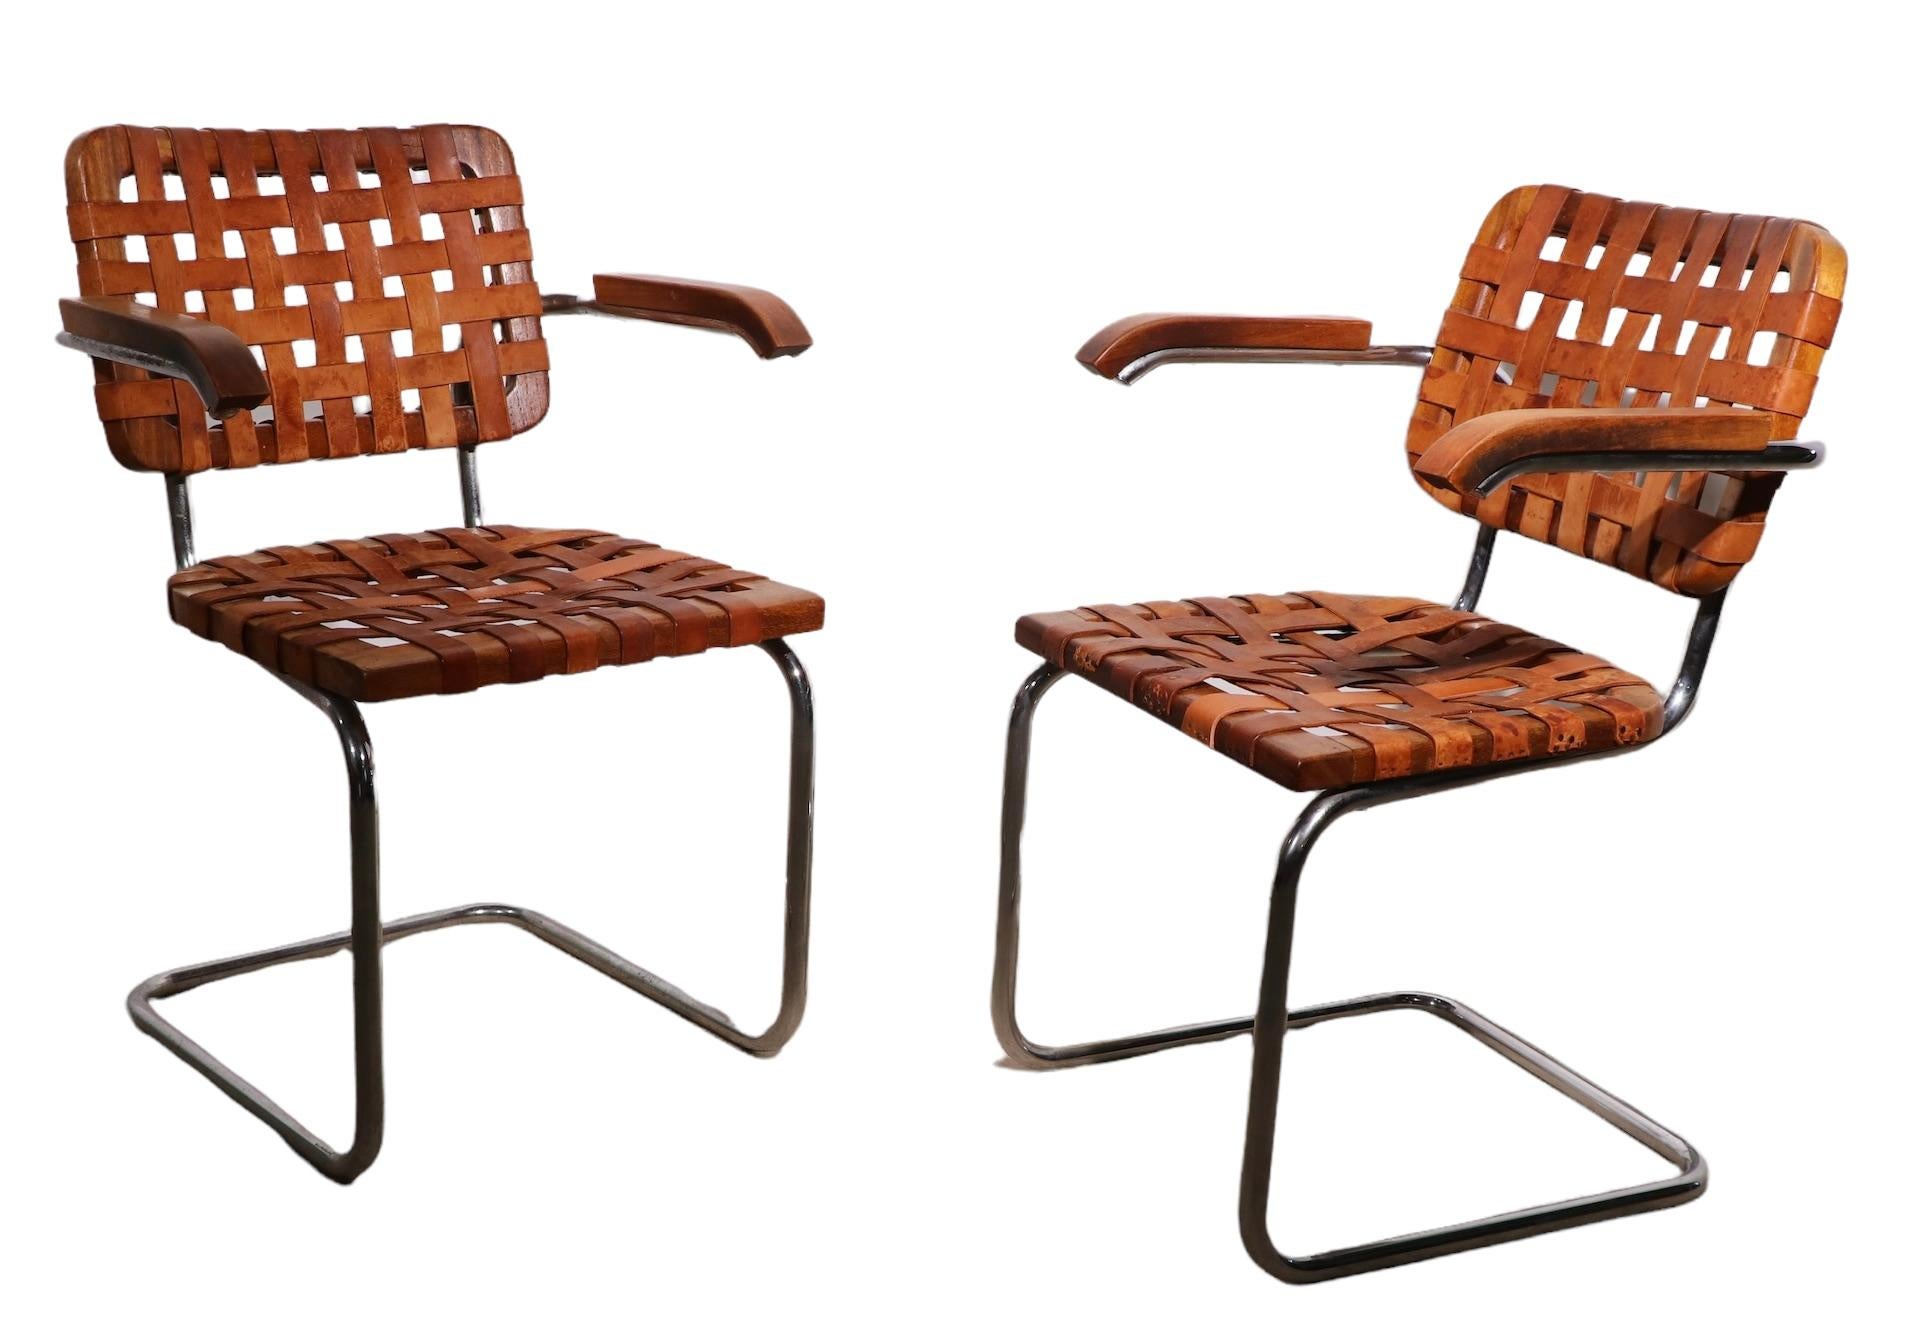 Unique leather strapped version of the iconic Cesca chair, designed by Marcel Breuer. These chairs were made in Italy, circa 1970's. Both are structurally sound and sturdy, both show cosmetic wear, and signs of age and use, including some replaced